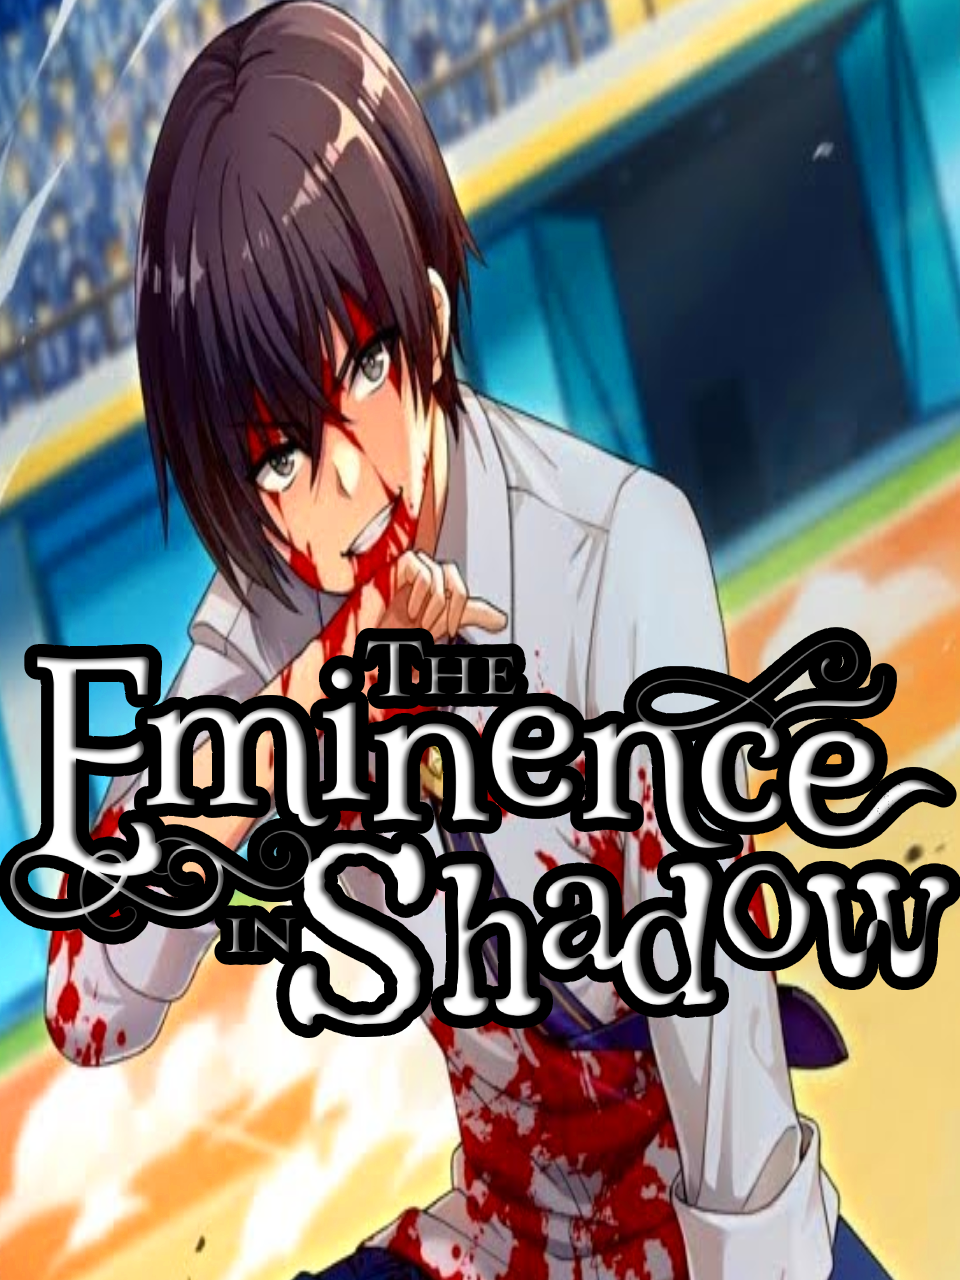 The Eminence in Shadow RPG – Game is Now Available for Mobile